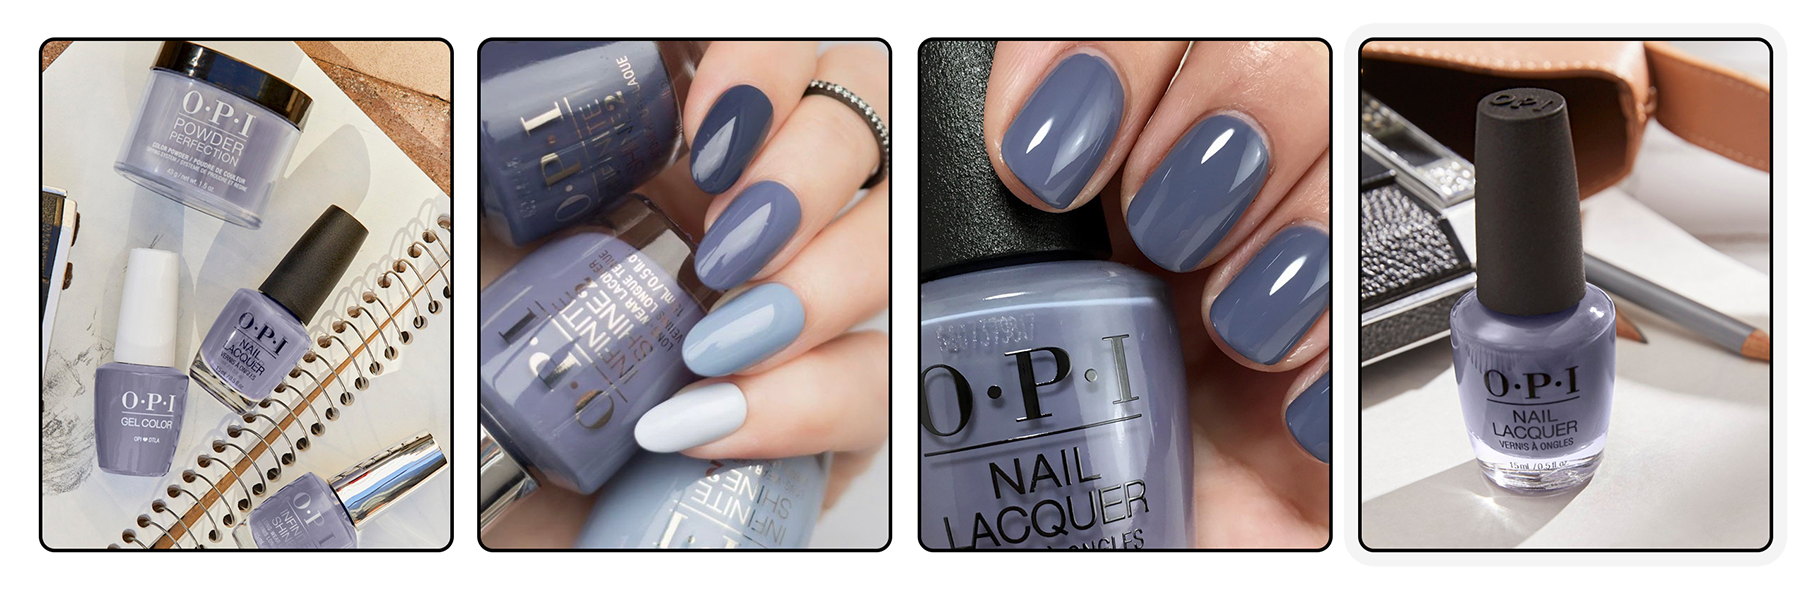 brand-footer-opi.png